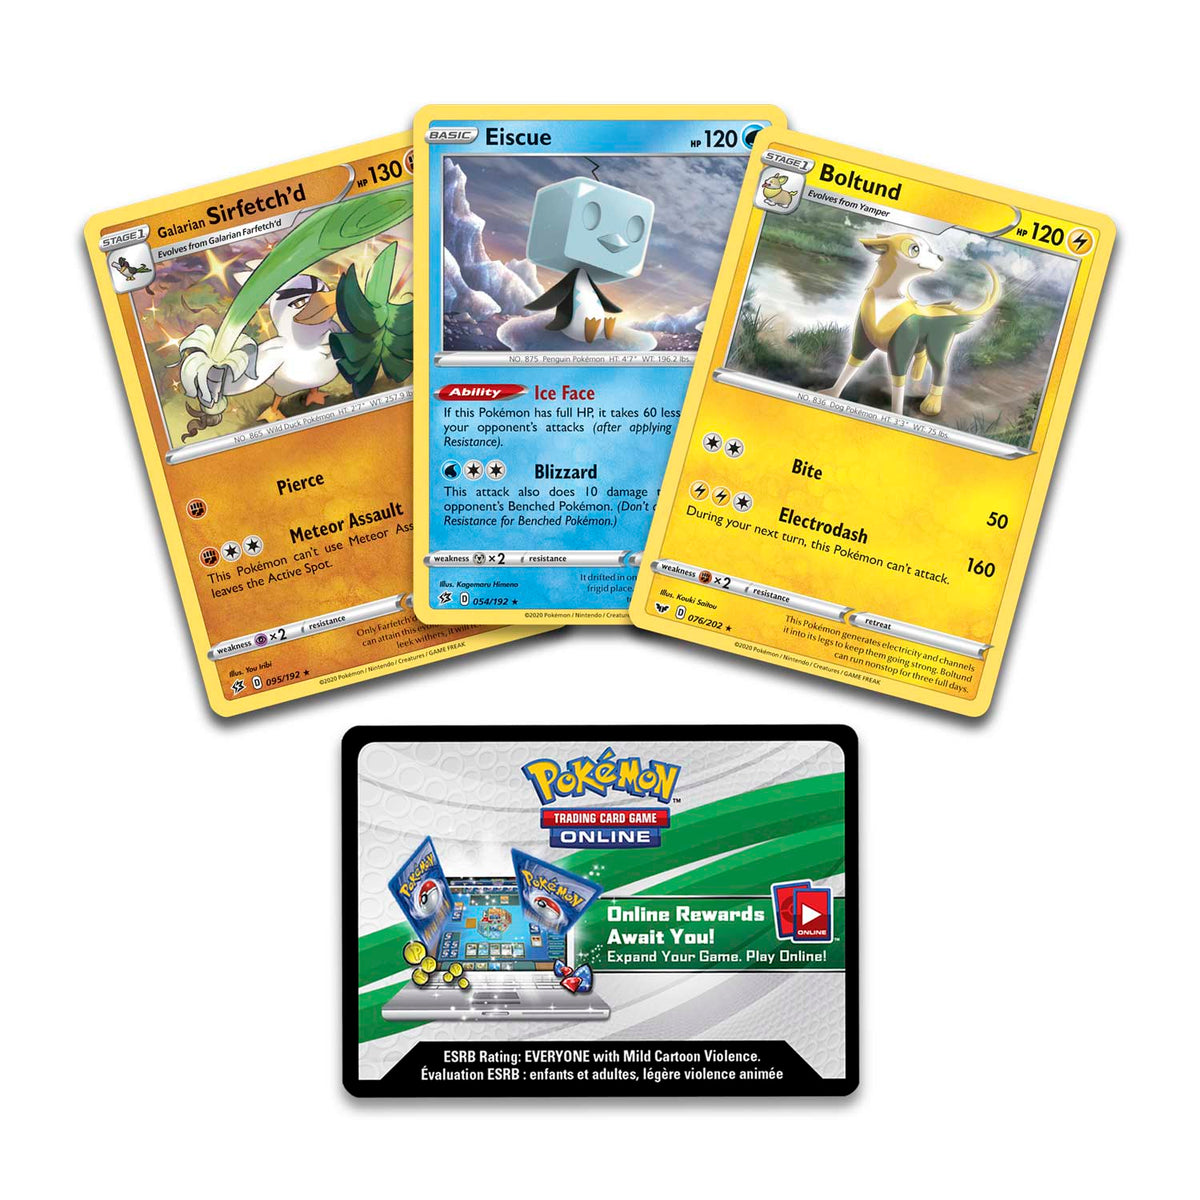 Pokemon TCG Knock Out Collection-Boltund &amp; Eiscue &amp; Sirfetch&#39;d-The Pokémon Company International-Ace Cards &amp; Collectibles